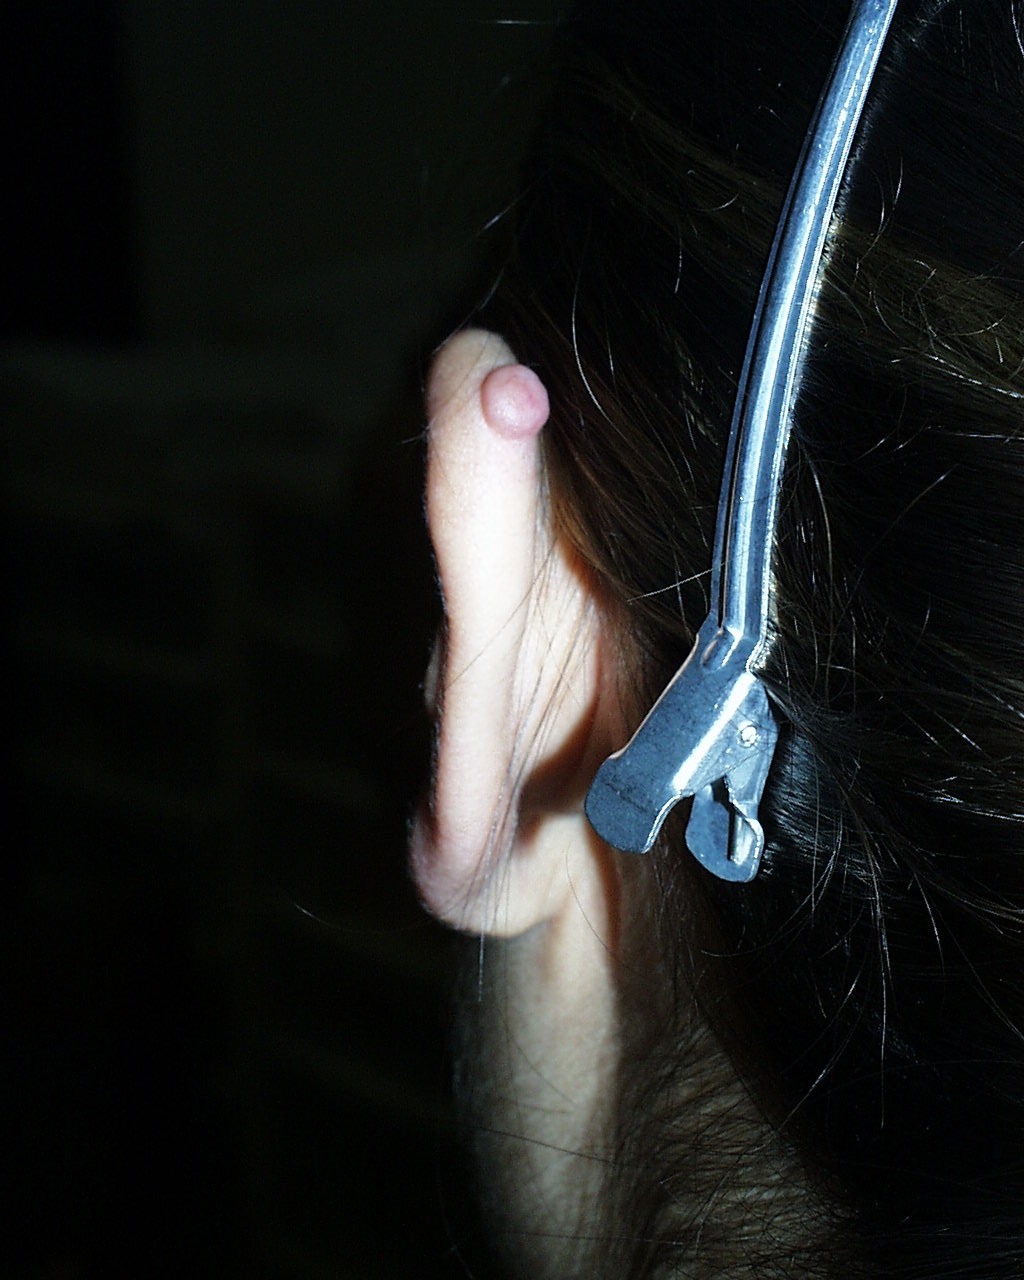 Keloid of the ear - view from behind.